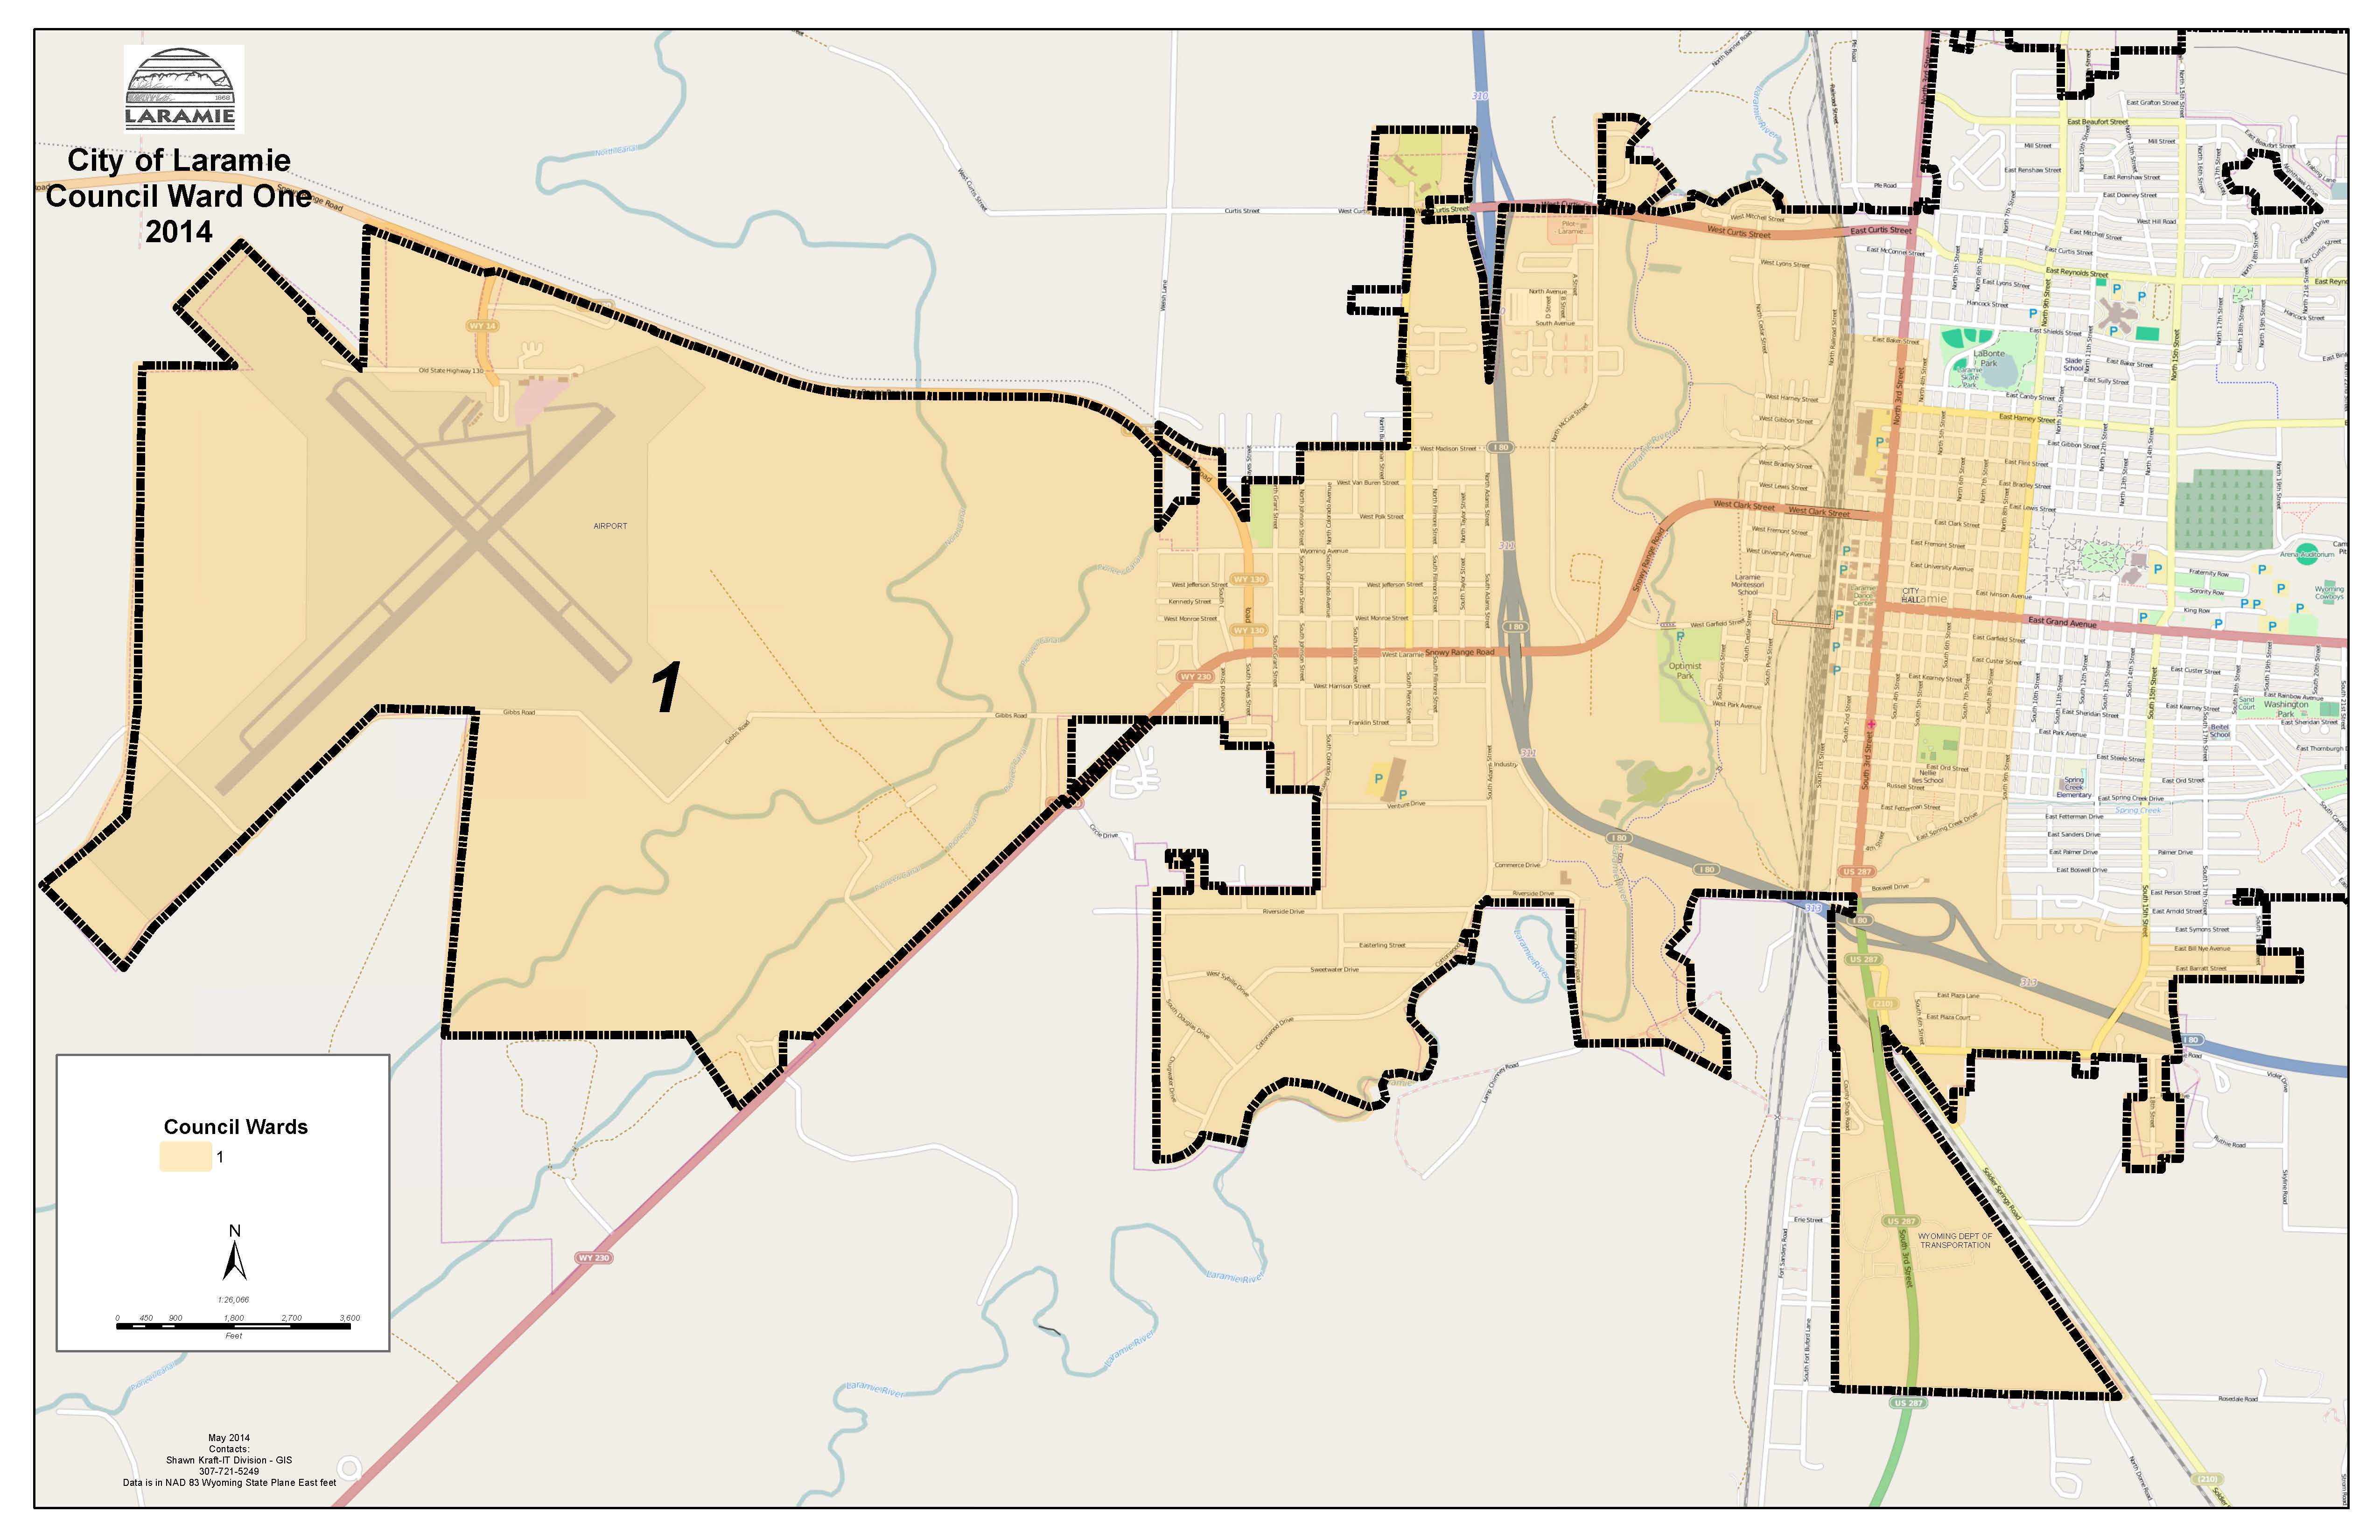 2014 Council Ward One Map